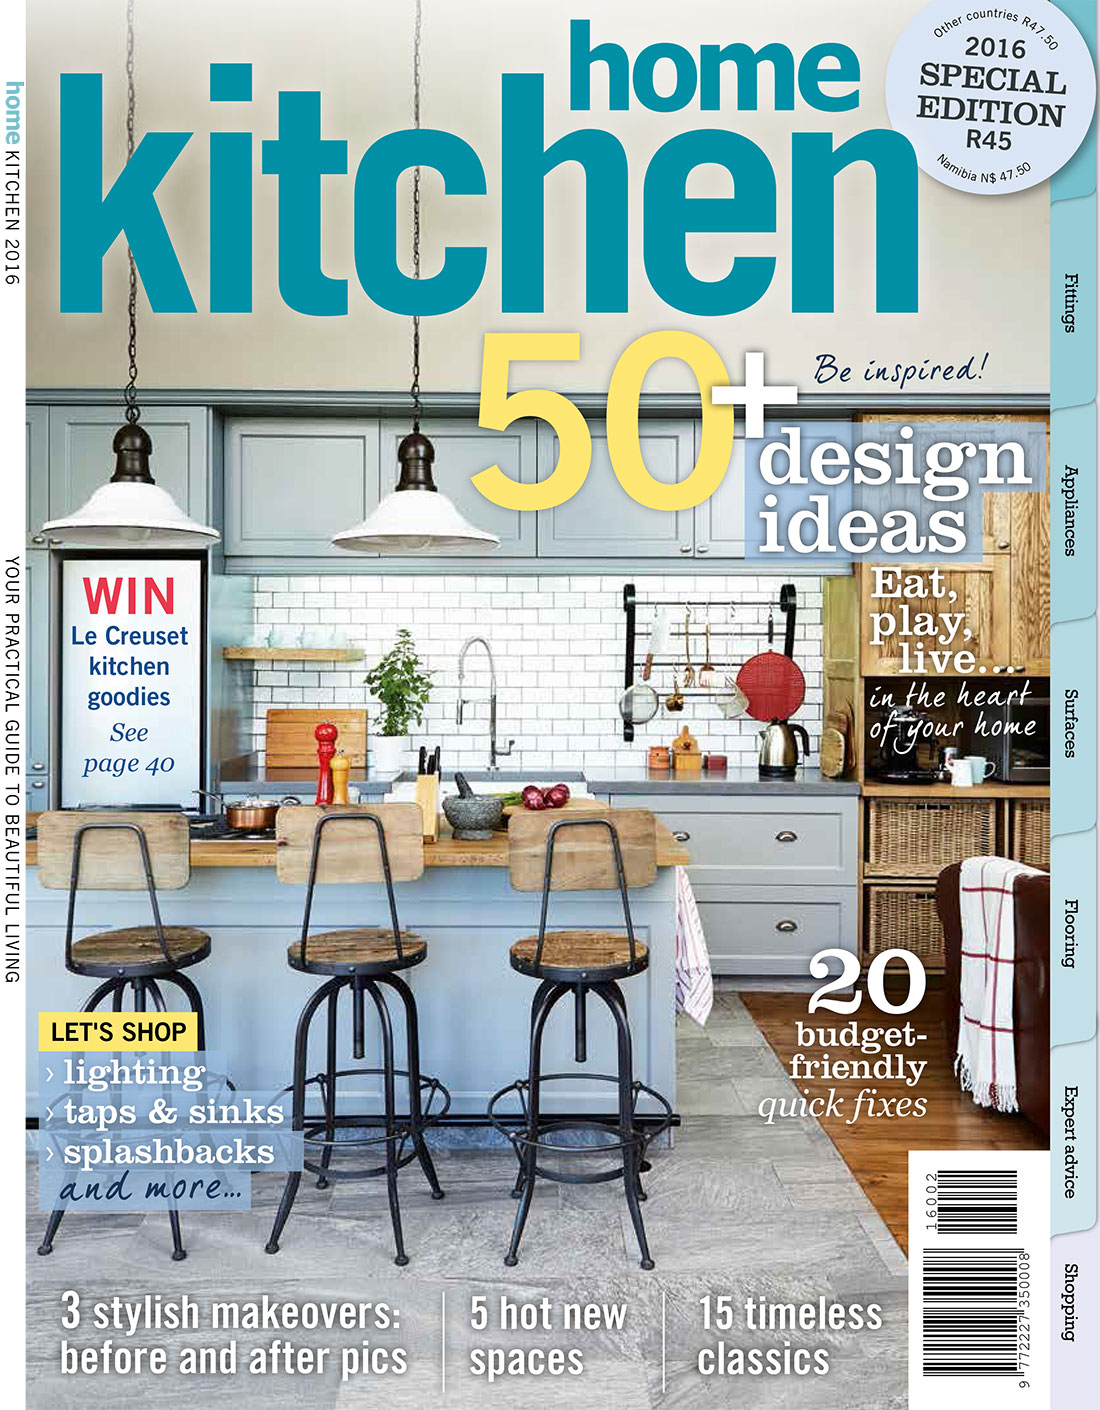 Kitchen and Home Article - March 2016